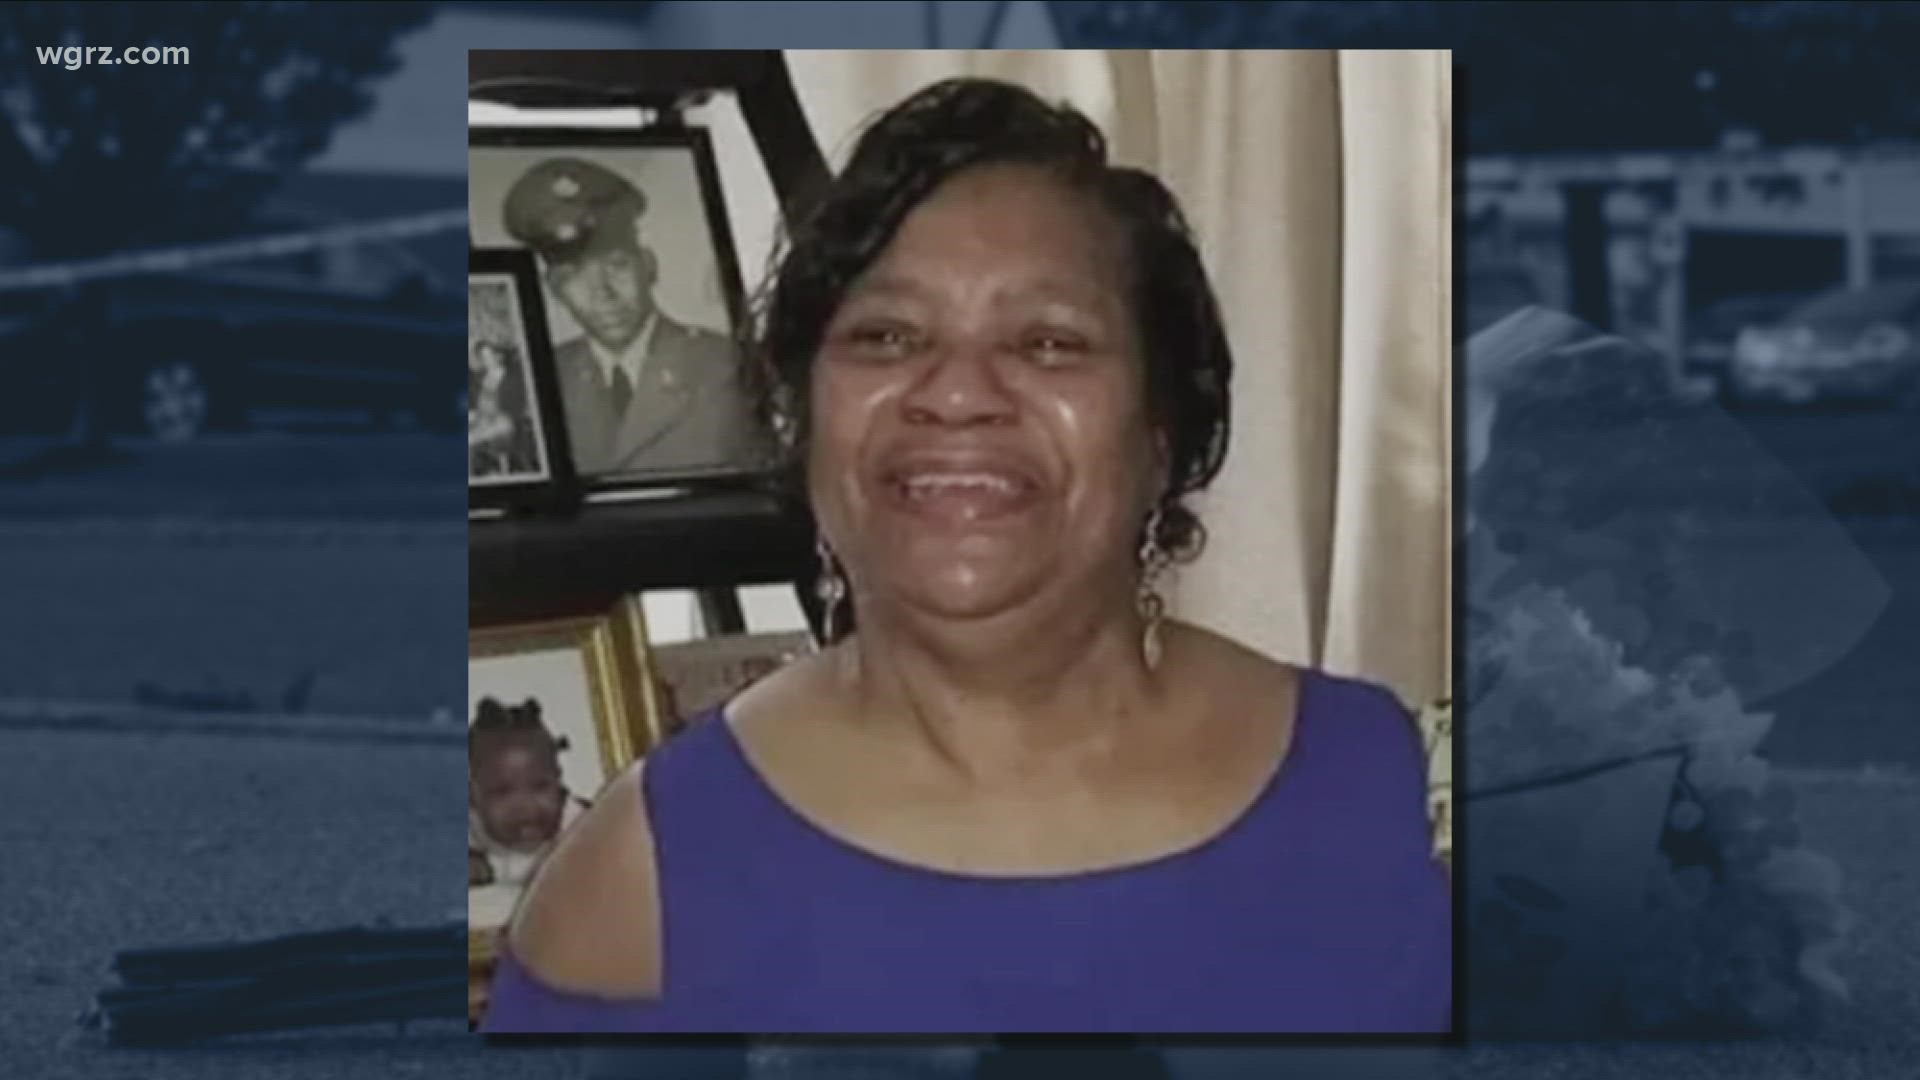 Friends and family remembering Celestine Chaney